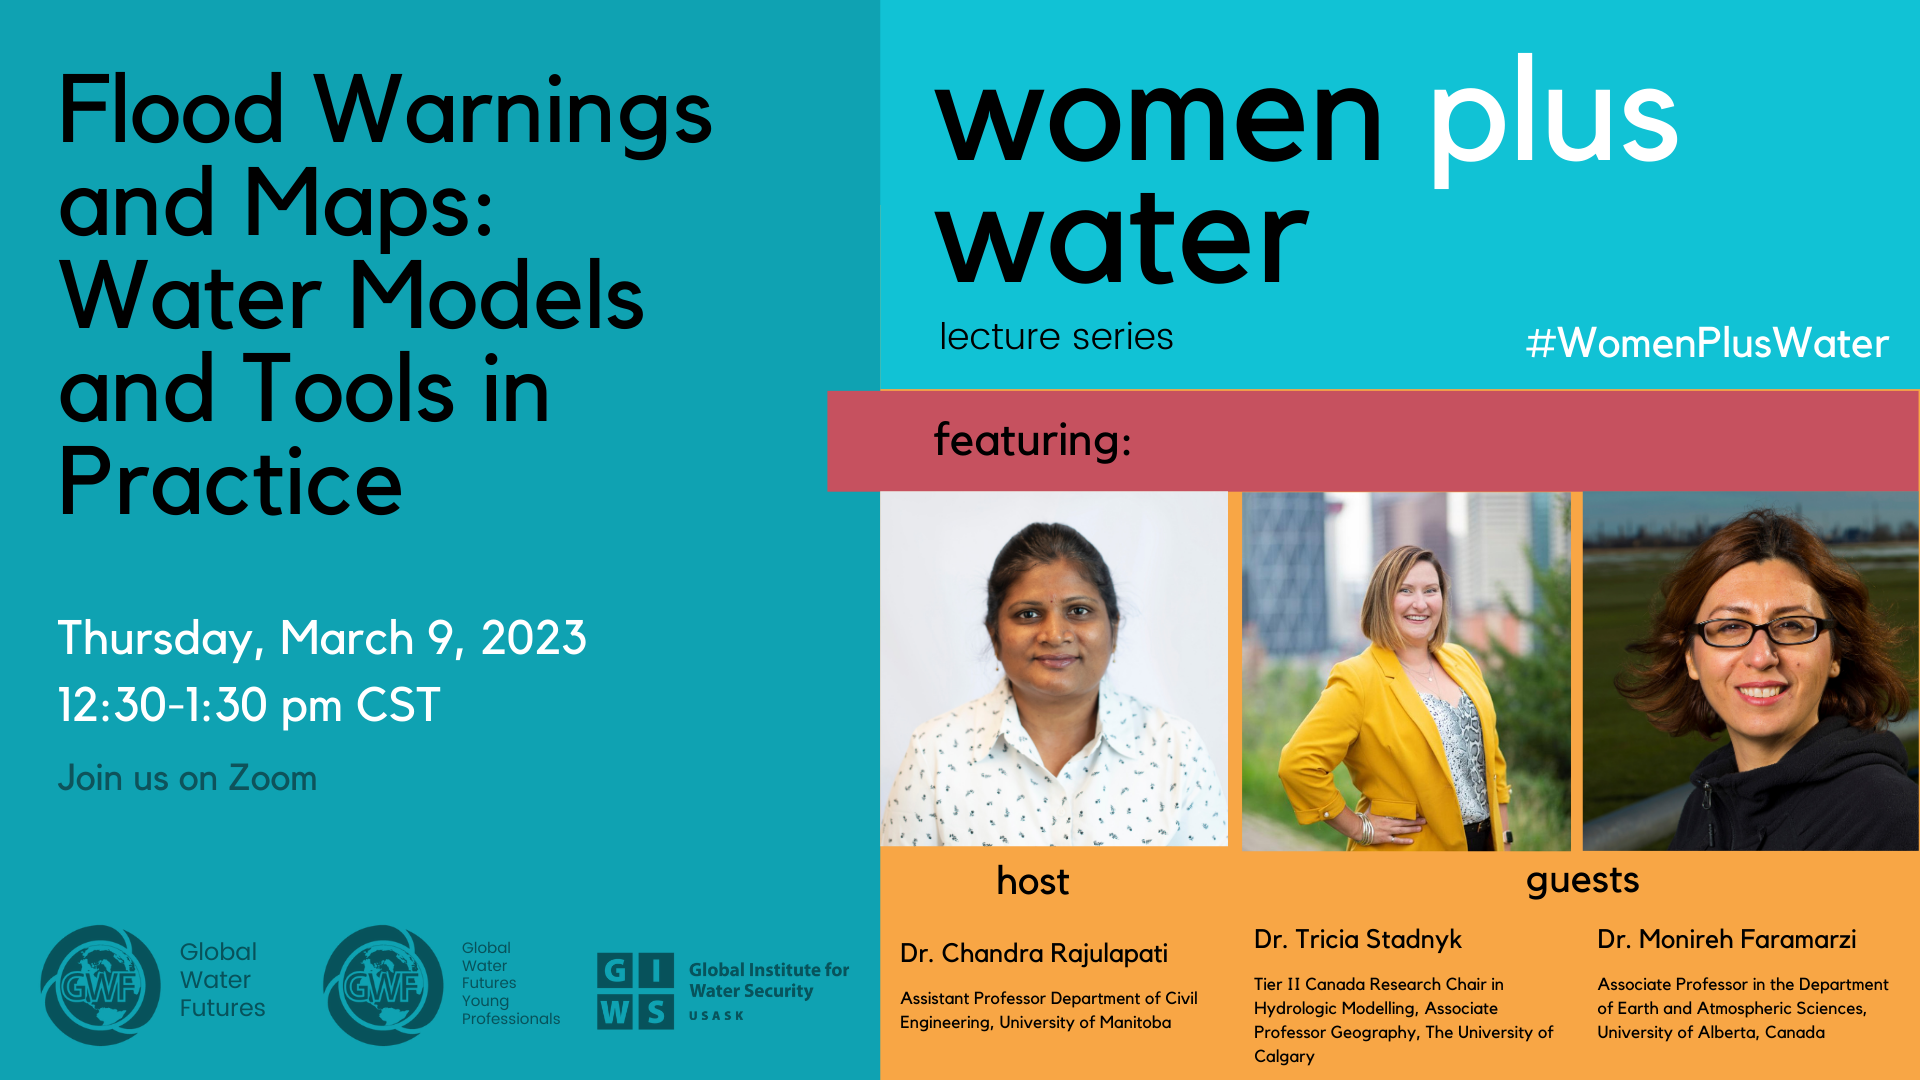 Women Plus Water Lecture Series - Flood Warnings and Maps